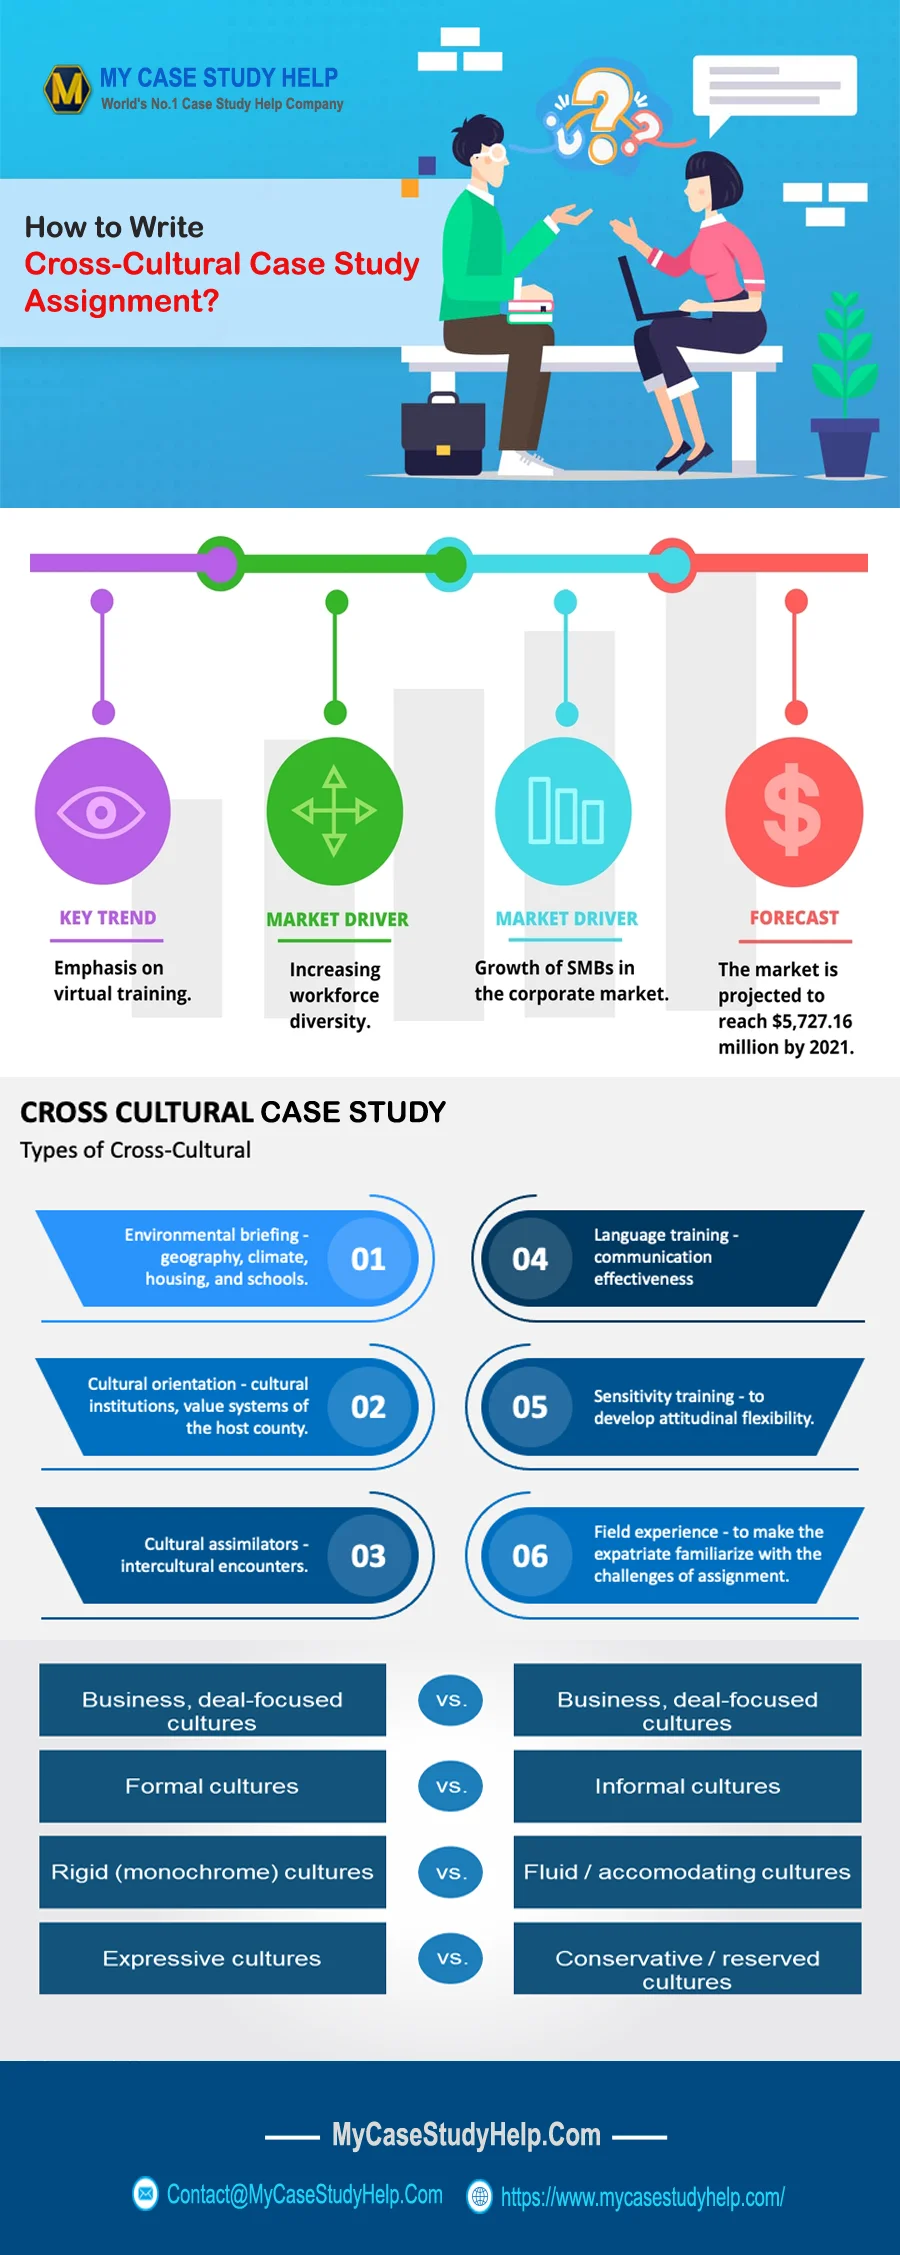 How To A Write Cross-Cultural Case Study Assignment?